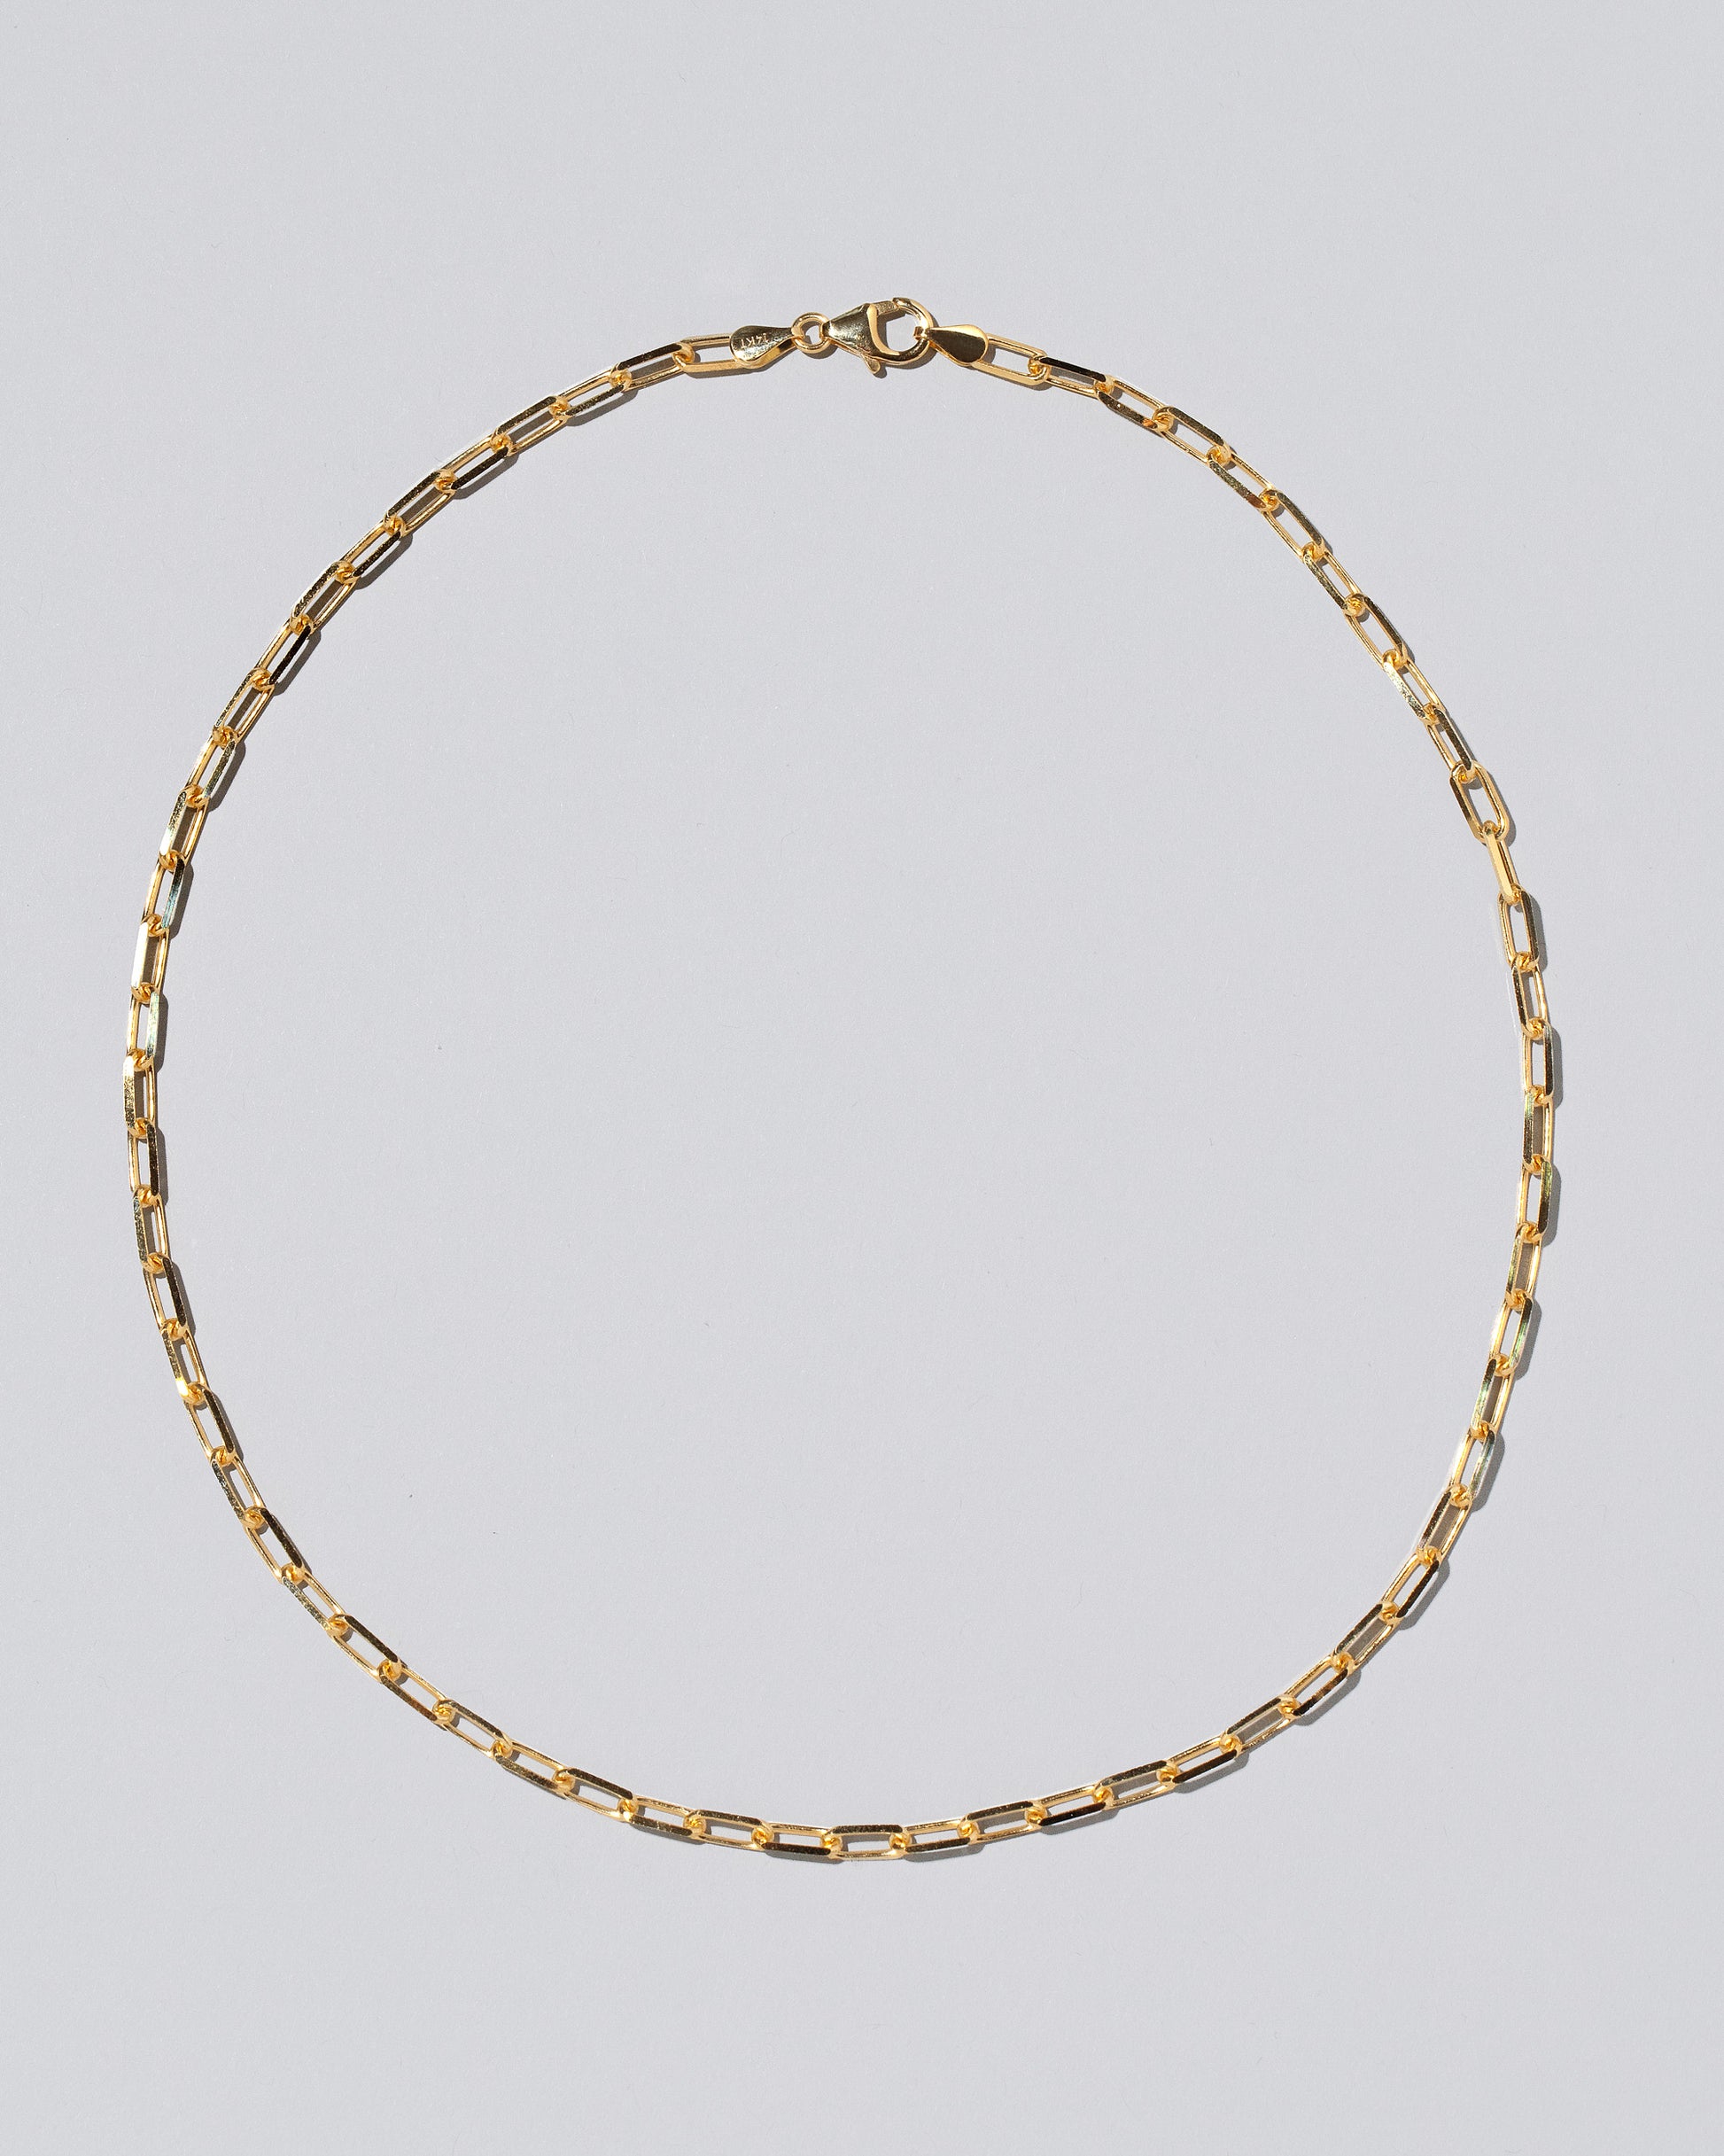 3.5mm Lightweight Beveled Oval Chain Necklace on light color background.